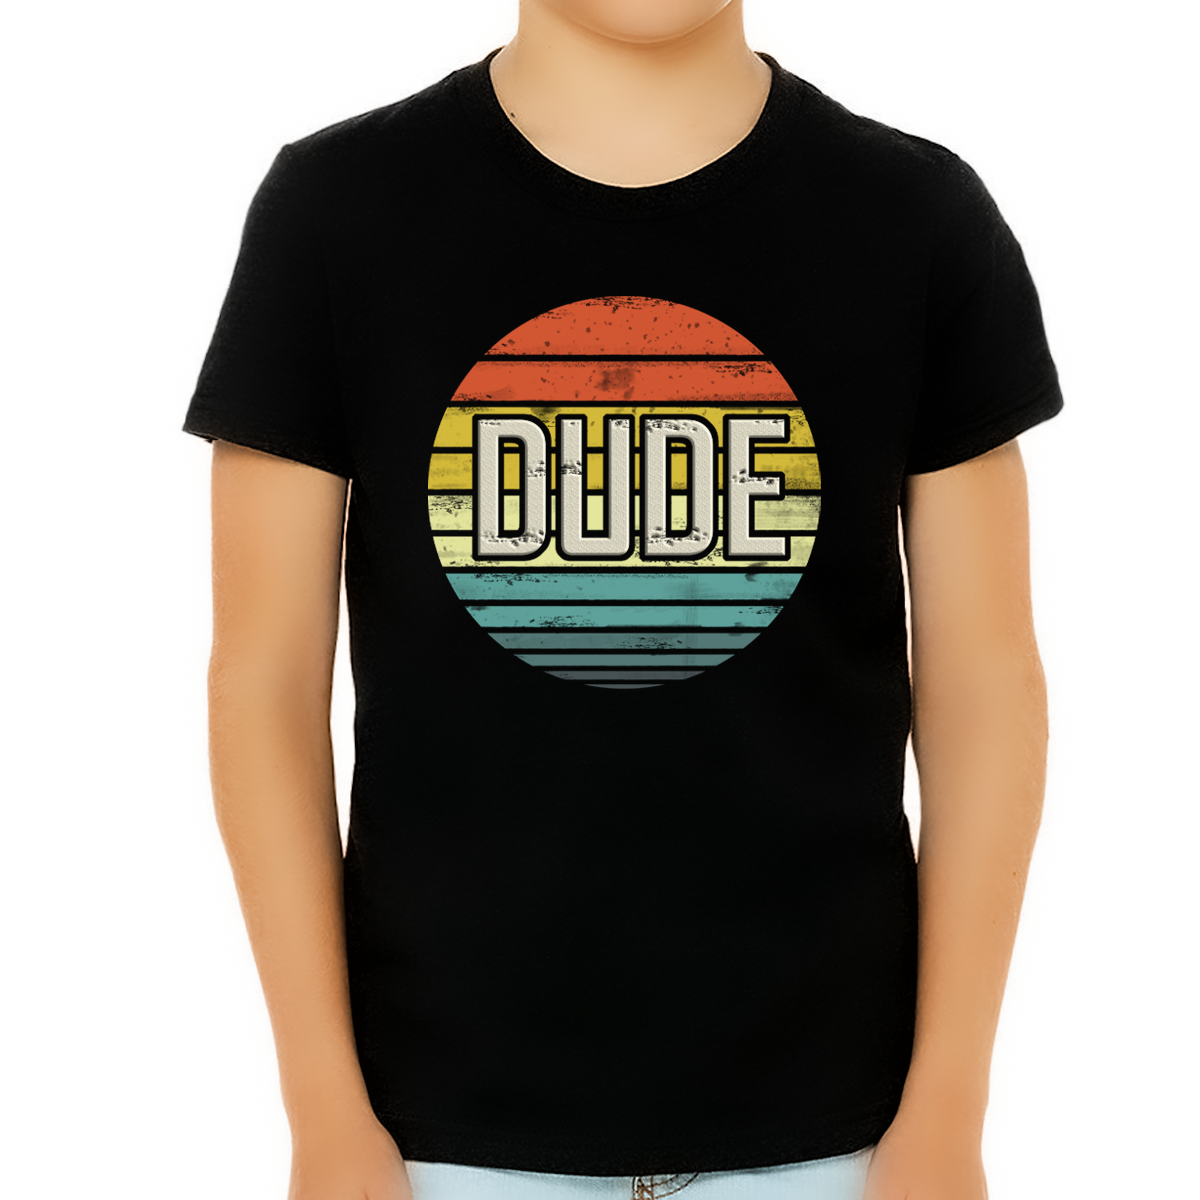 Perfect Dude Shirt for BOYS - Perfect Dude Merchandise - Perfect Dude Retro Vintage Shirts for BOYS - Fire Fit Designs